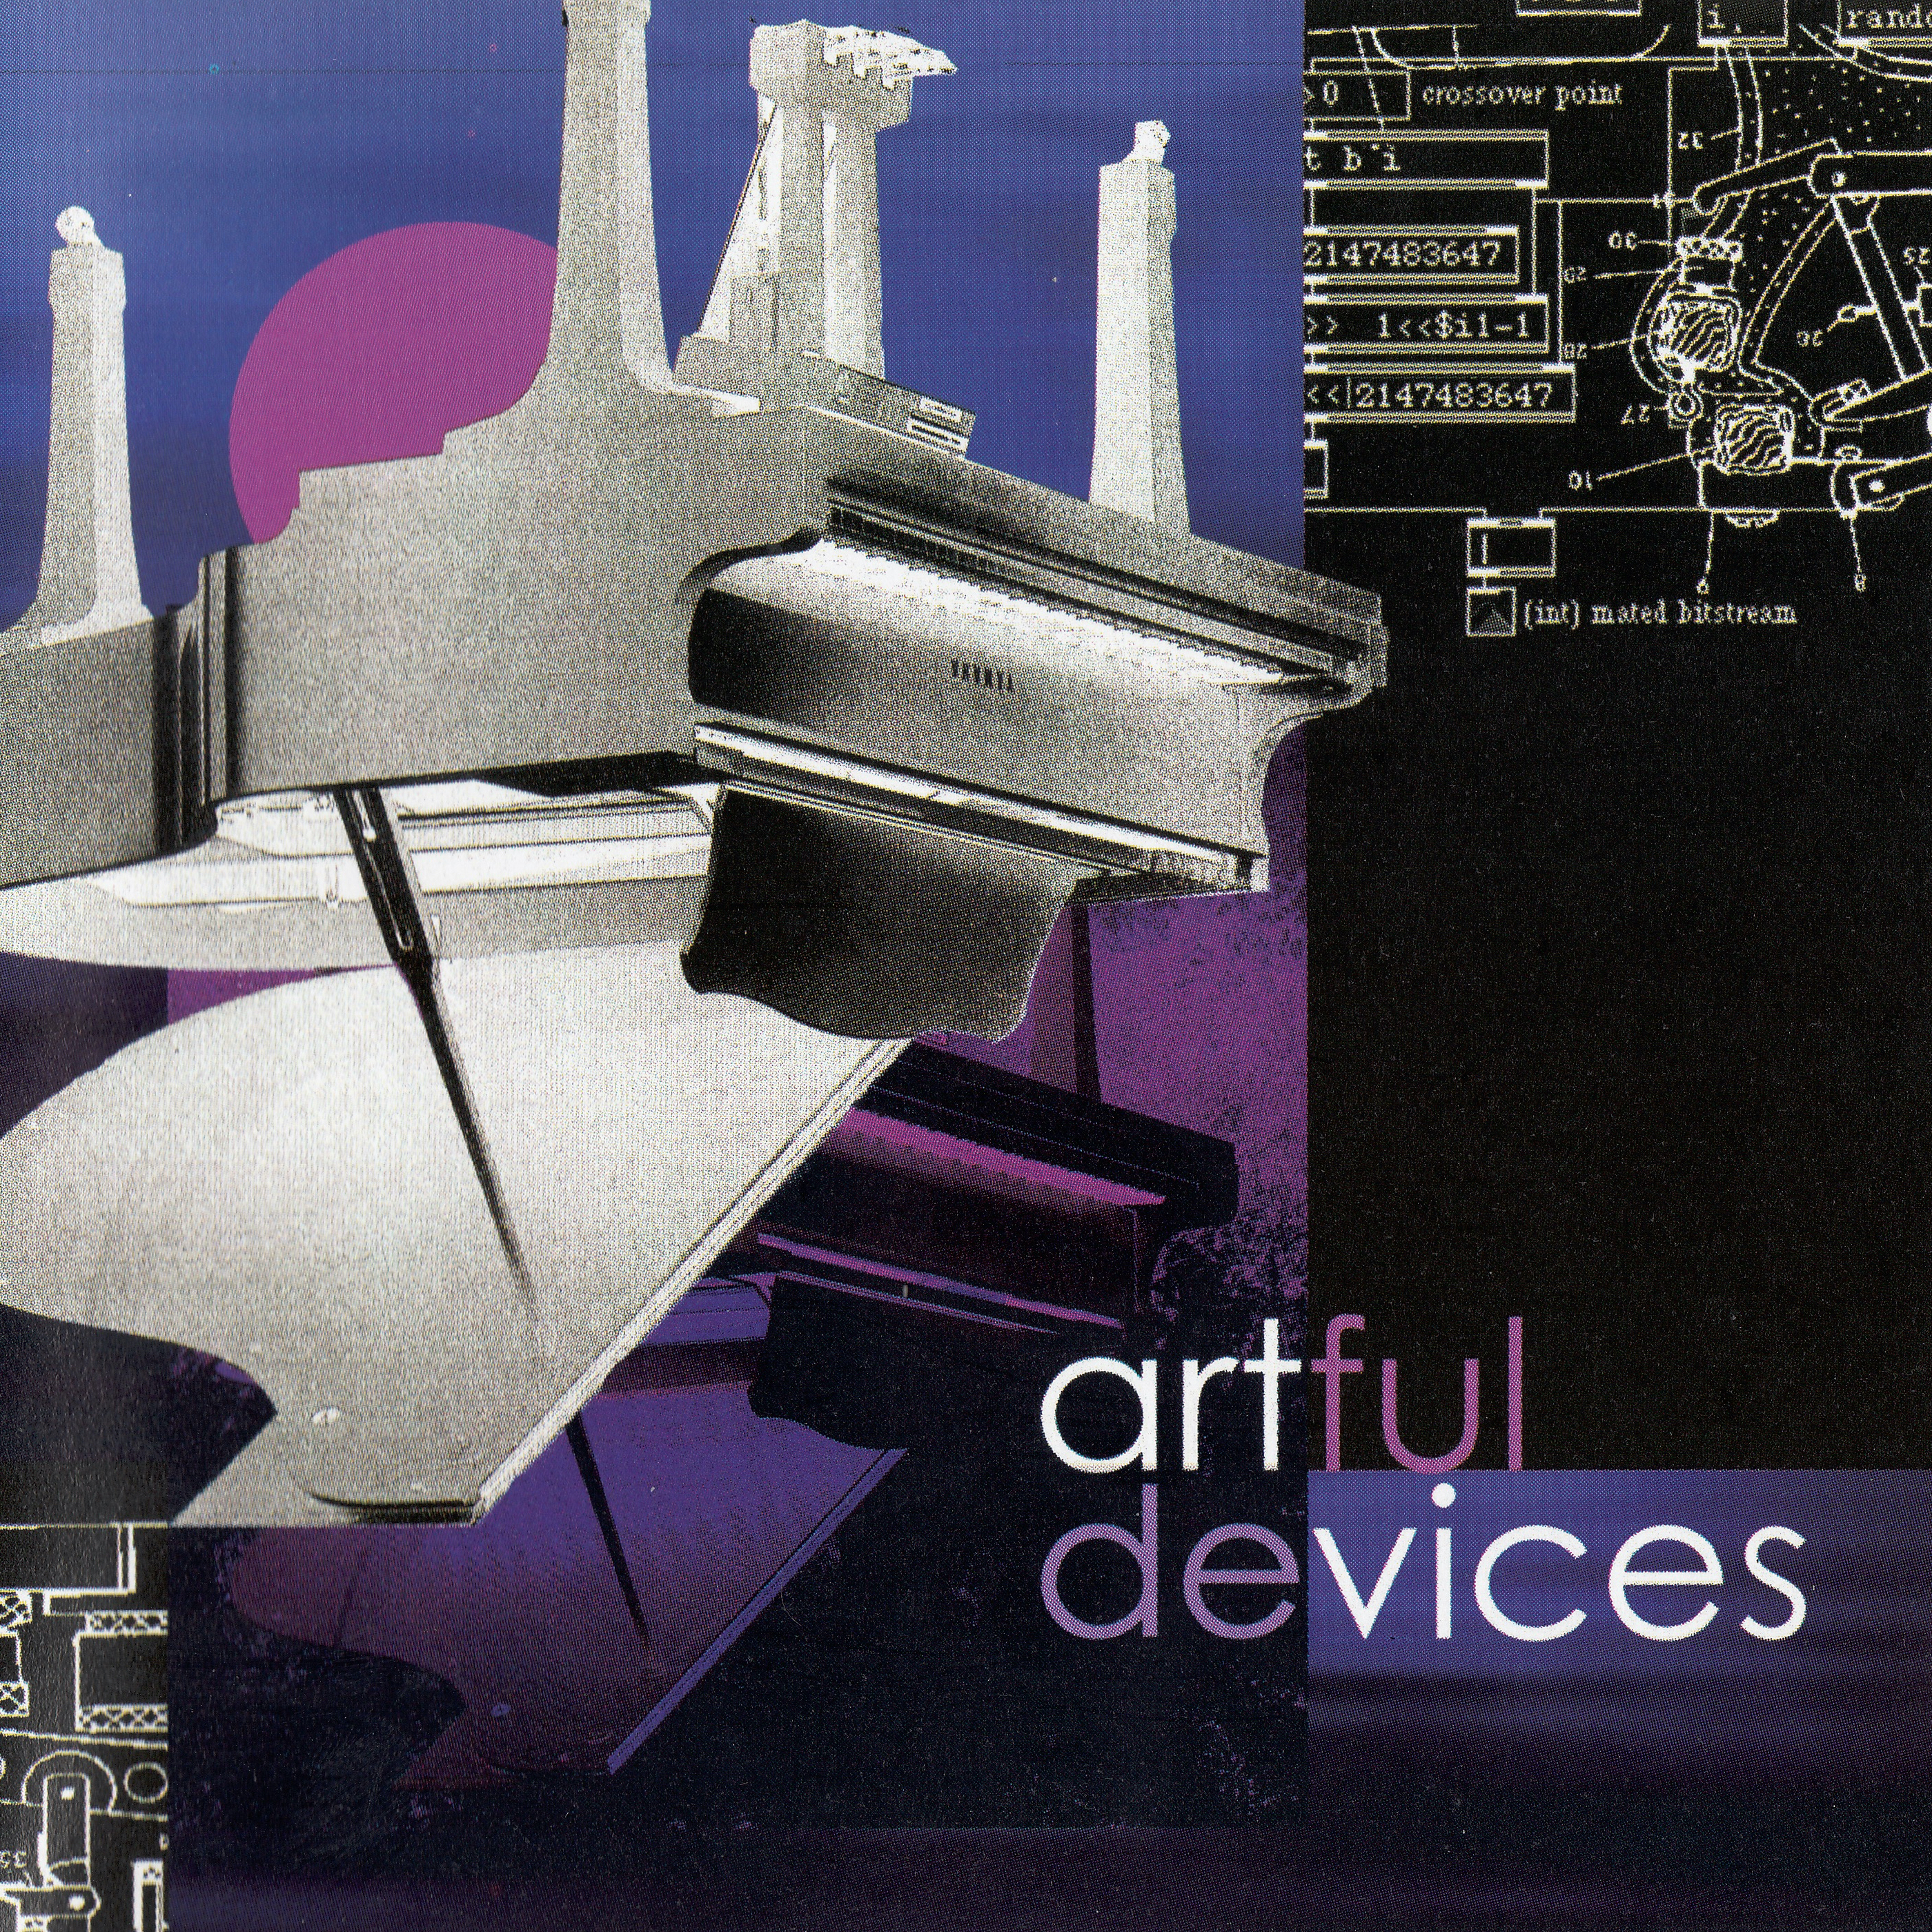 Artful Devices